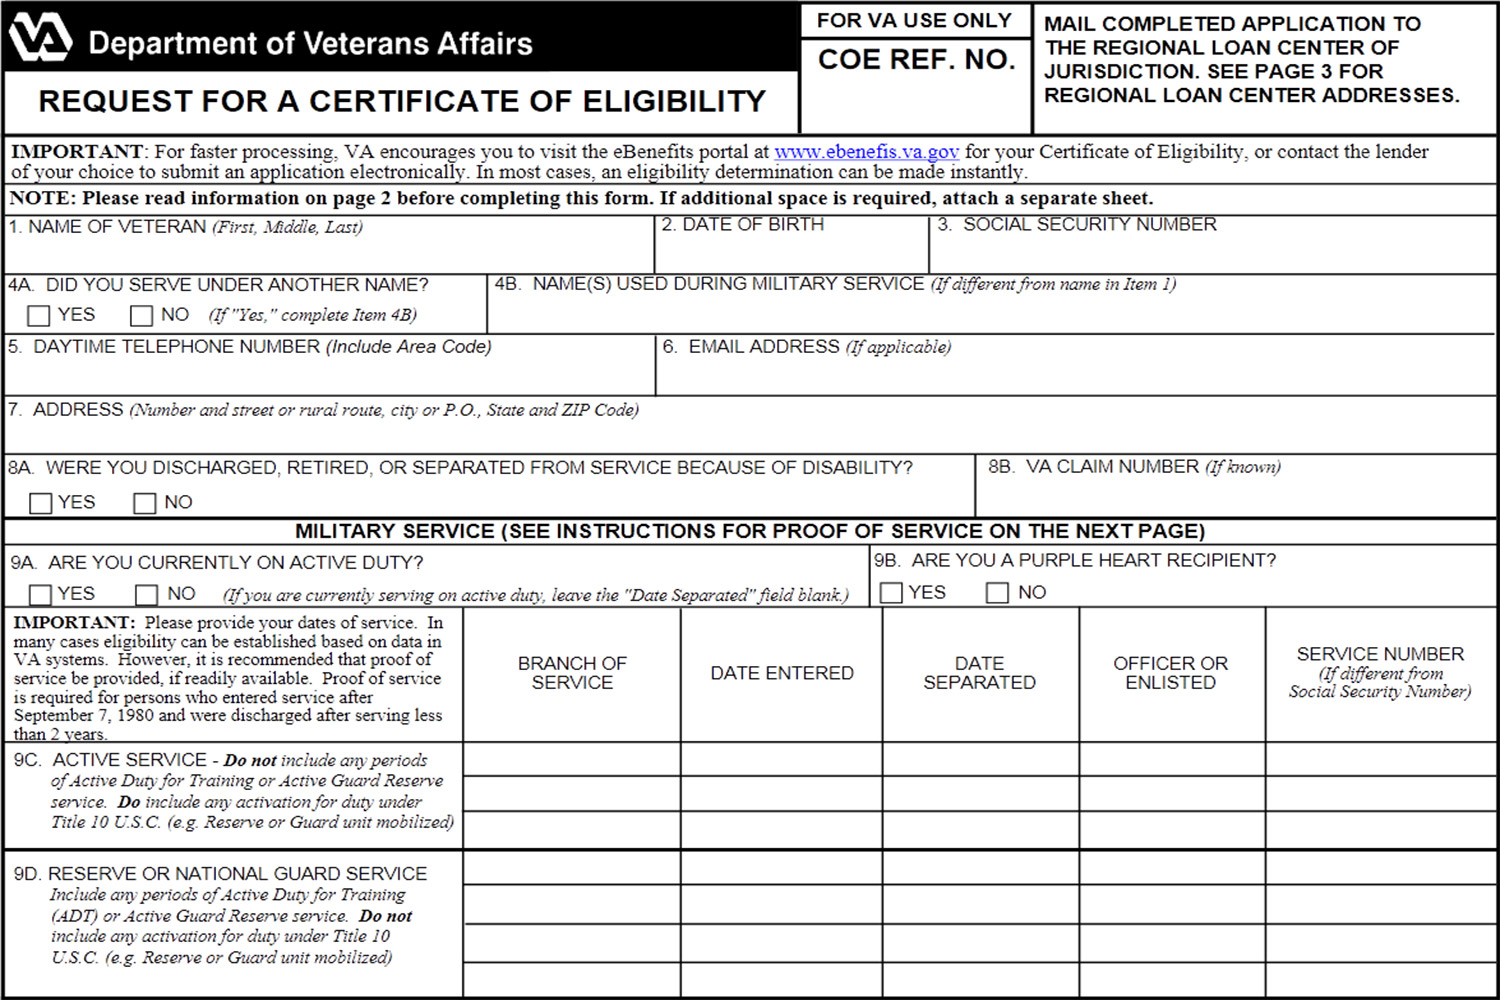 Getting Your VA Certificate of Eligibility: Everything You Need to Know